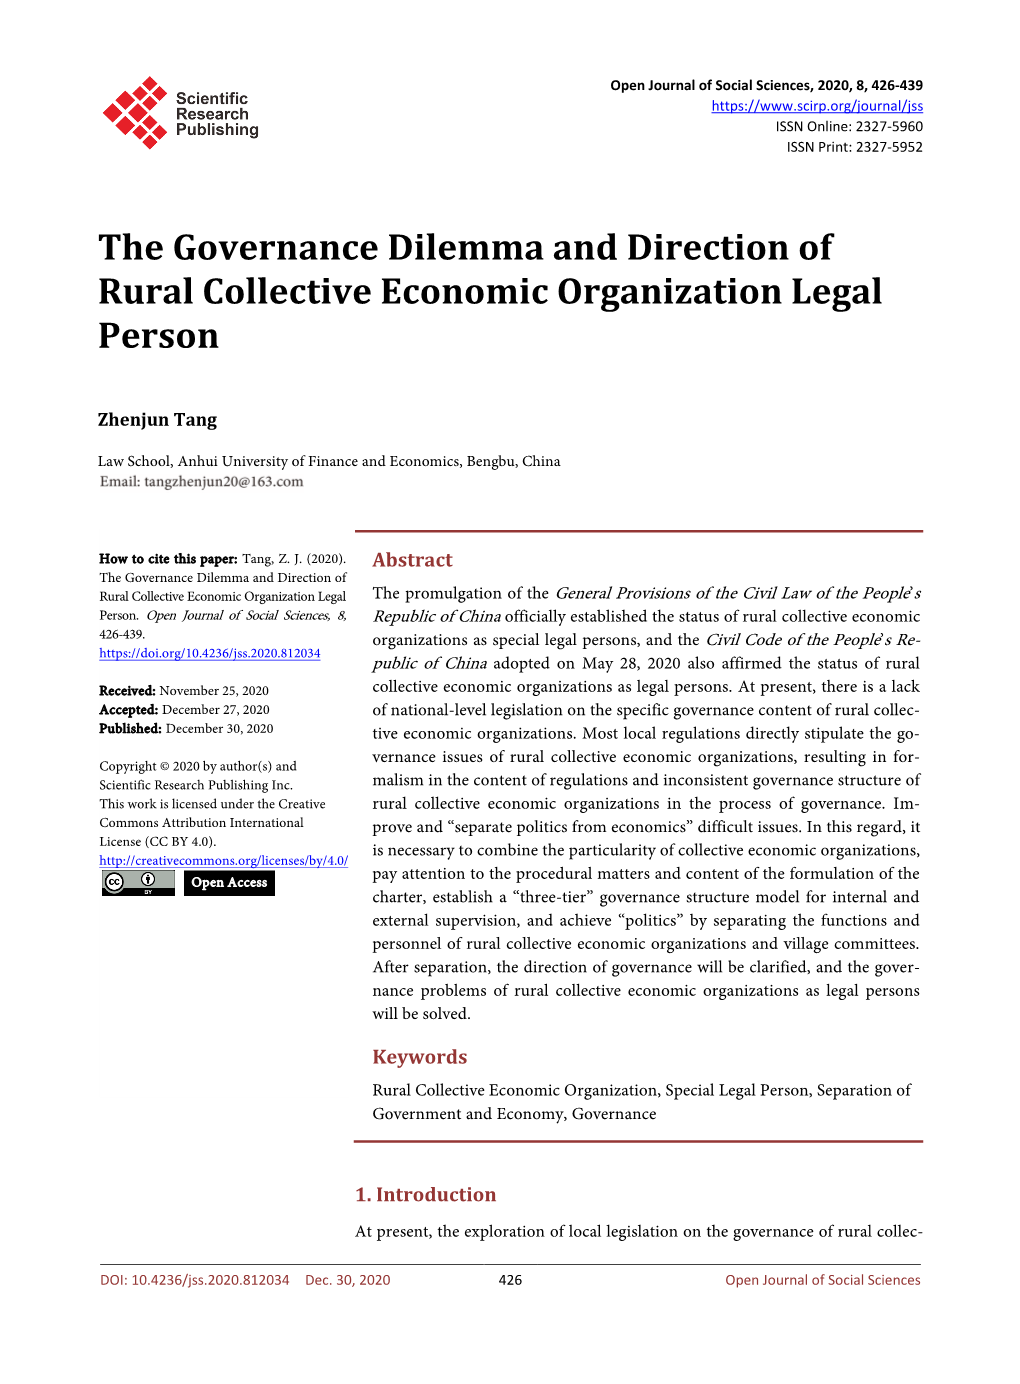 The Governance Dilemma and Direction of Rural Collective Economic Organization Legal Person